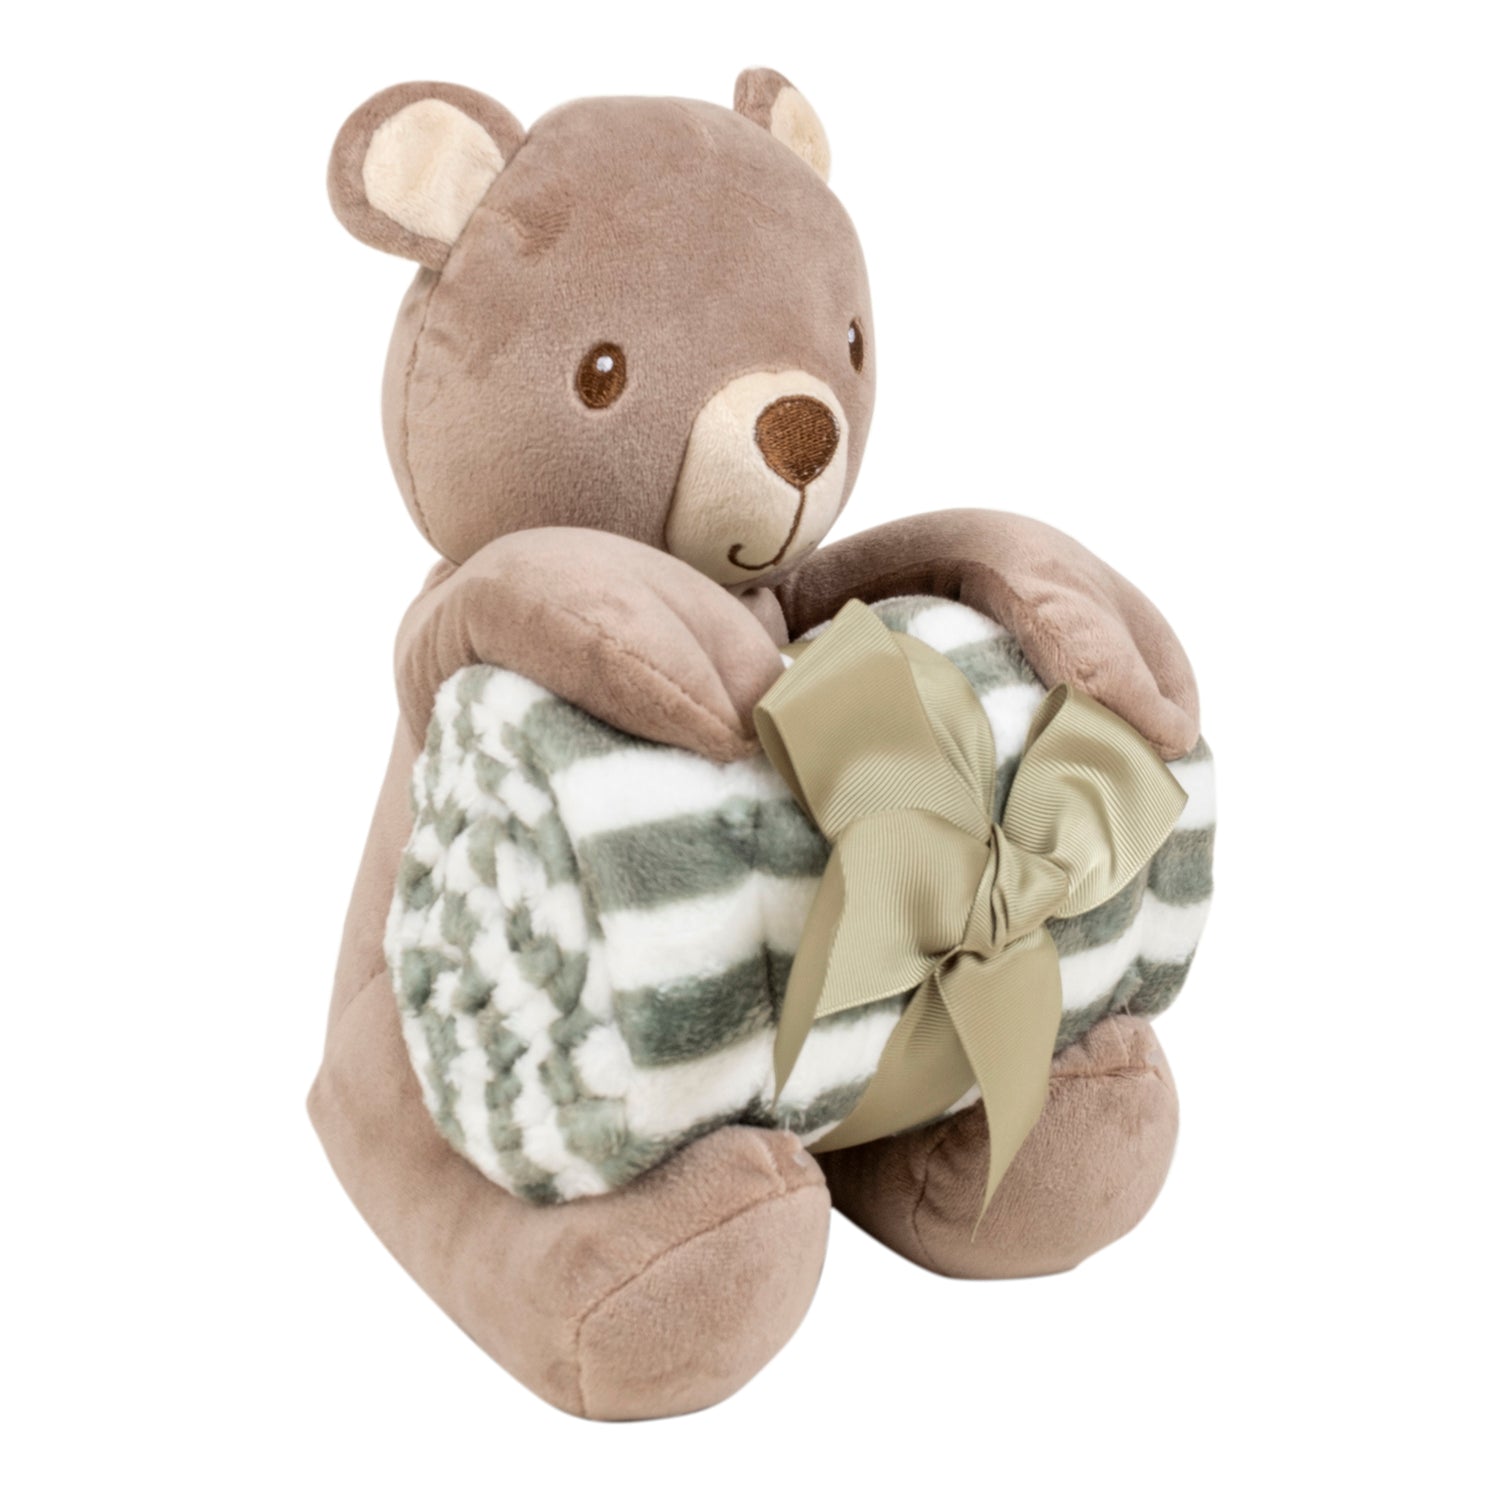 Baby Moo Bear Snuggle Buddy Soft Rattle and Plush Blanket Gift Toy Blanket - Brown